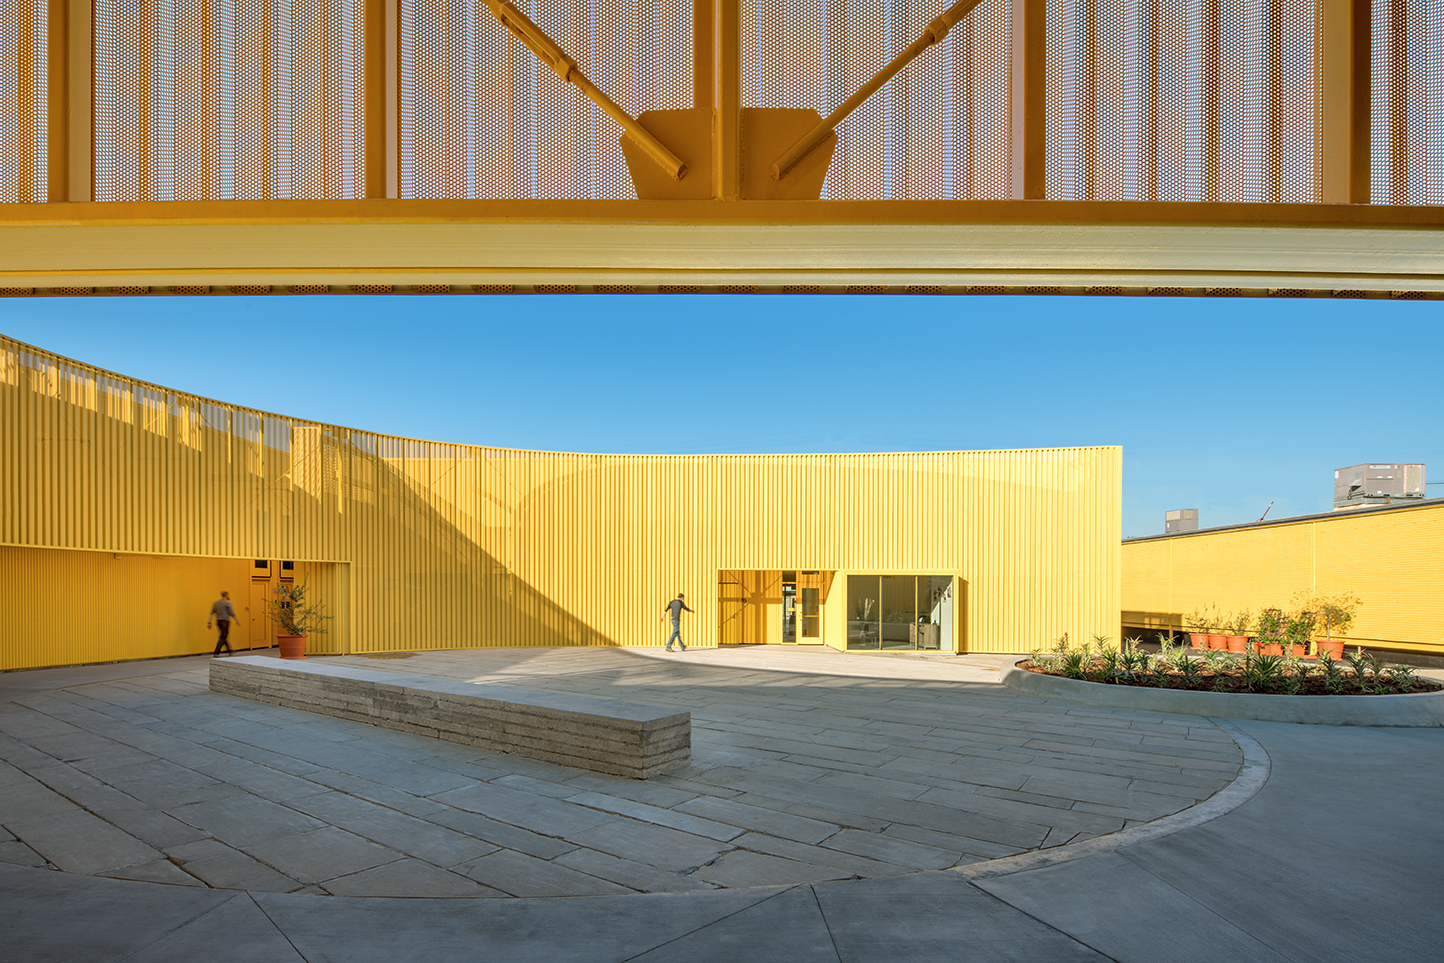 Animo South Los Angeles High School by Brooks + Scarpa Architects, Los Angeles, California